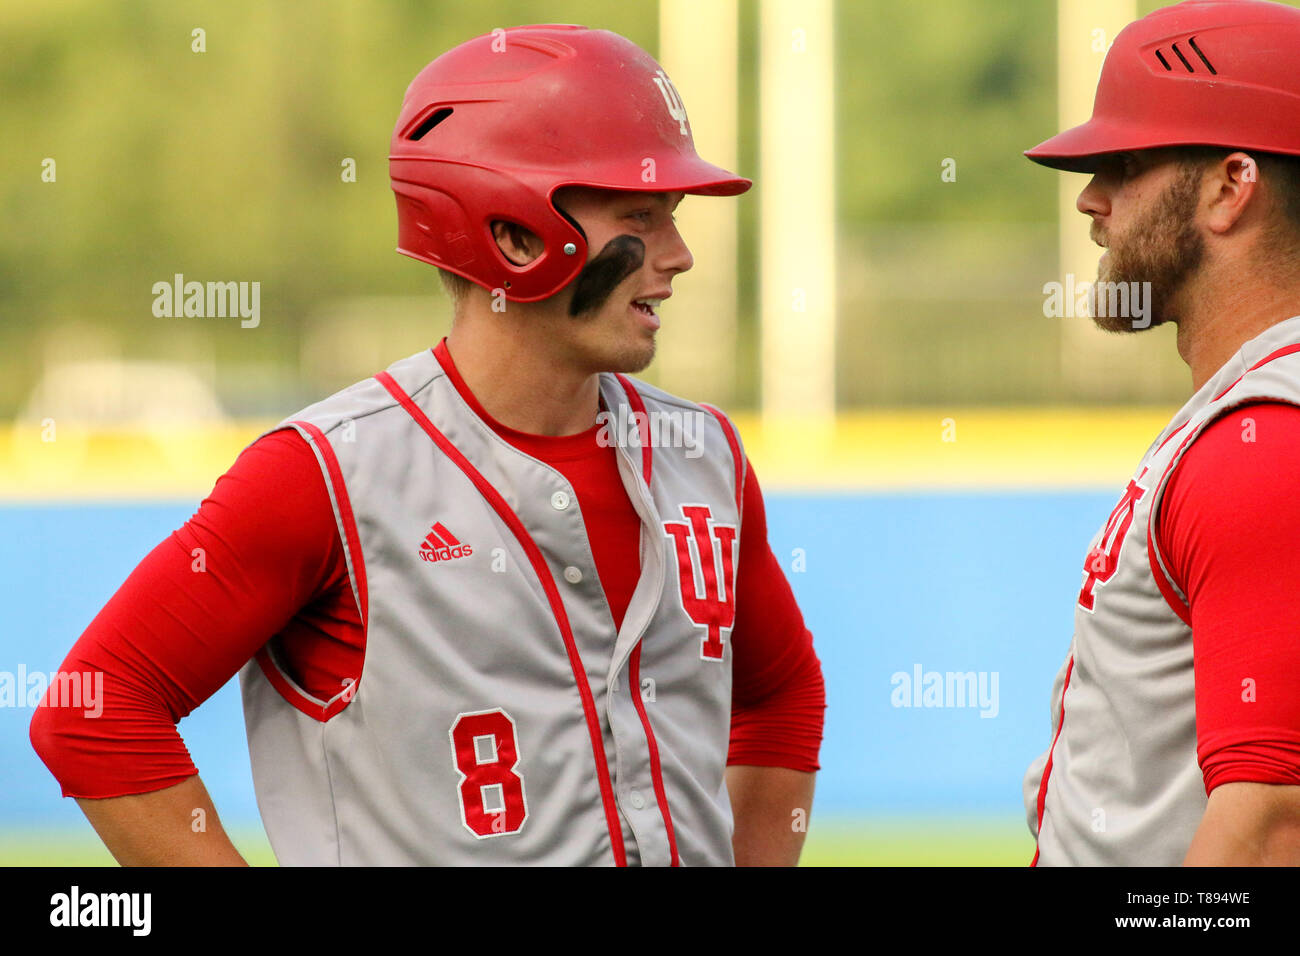 Lexington, KY, USA. 7th May, 2019. Indiana's Drew Ashley (left) talks with assistant coach Casey Dykes (right) during a game between the Kentucky Wildcats and the Indiana Hoosiers at Kentucky Pride Park in Lexington, KY. Kevin Schultz/CSM/Alamy Live News Stock Photo